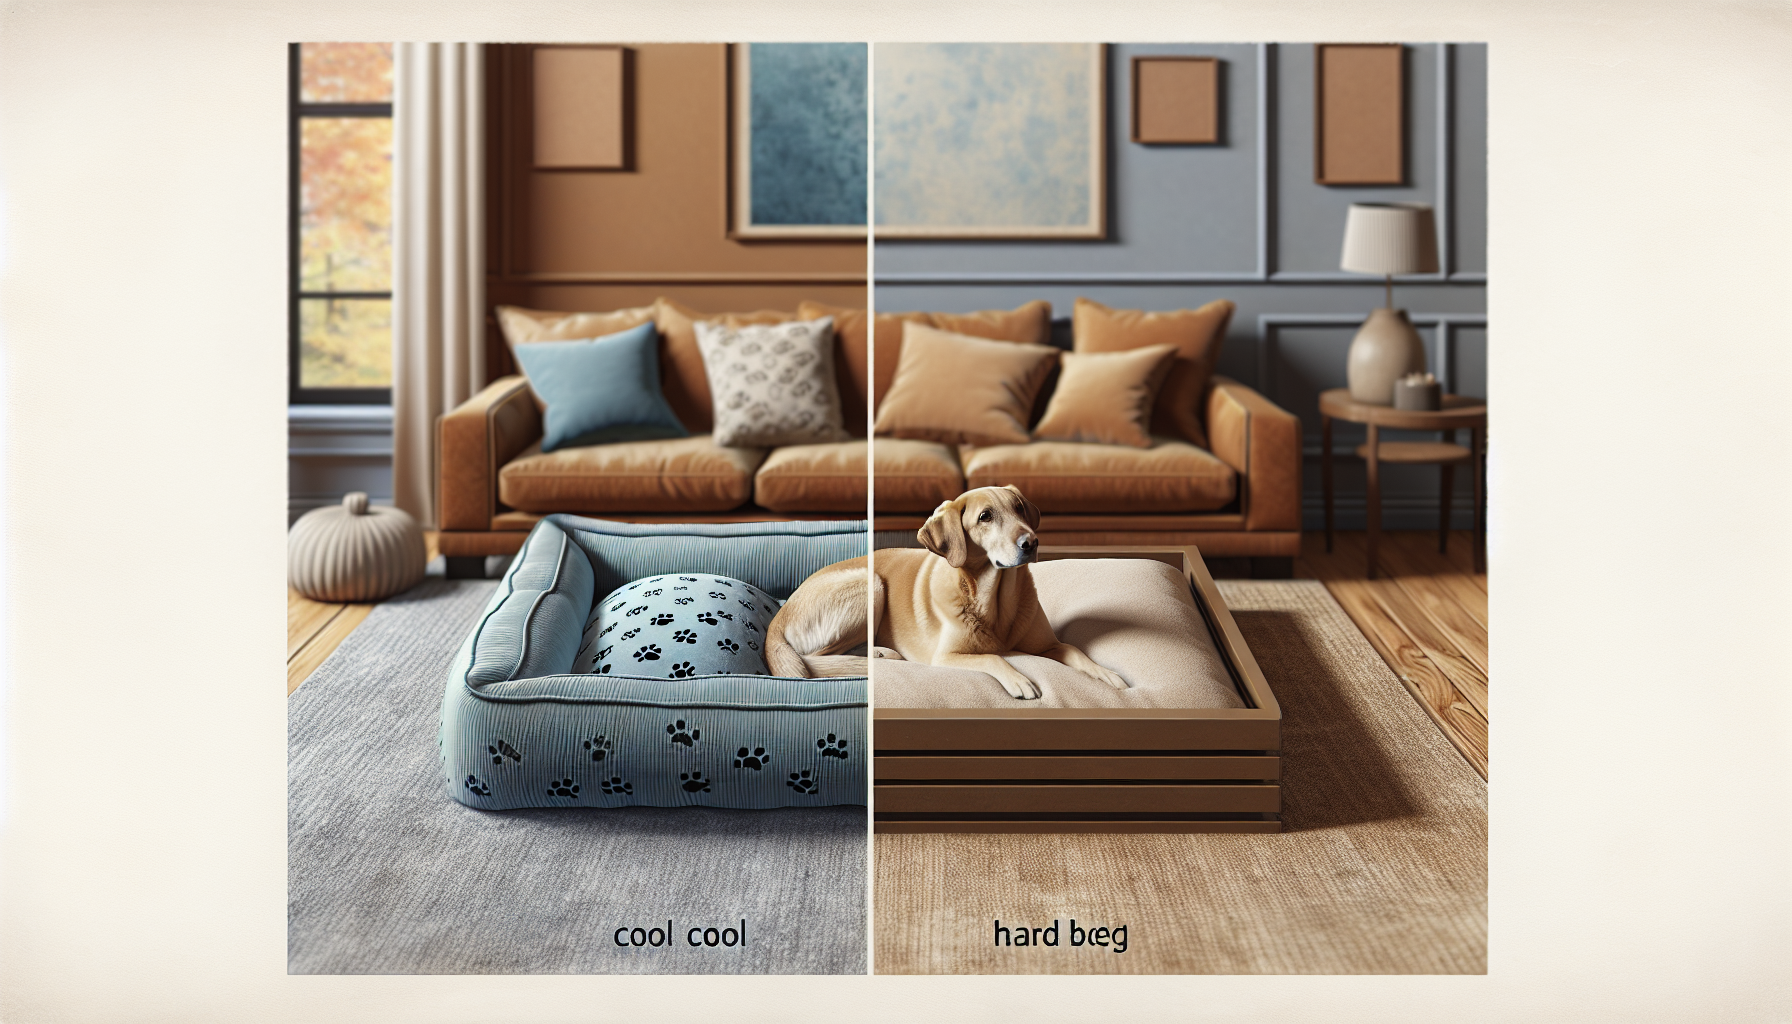 Are Soft Or Hard Beds Better For Dogs?